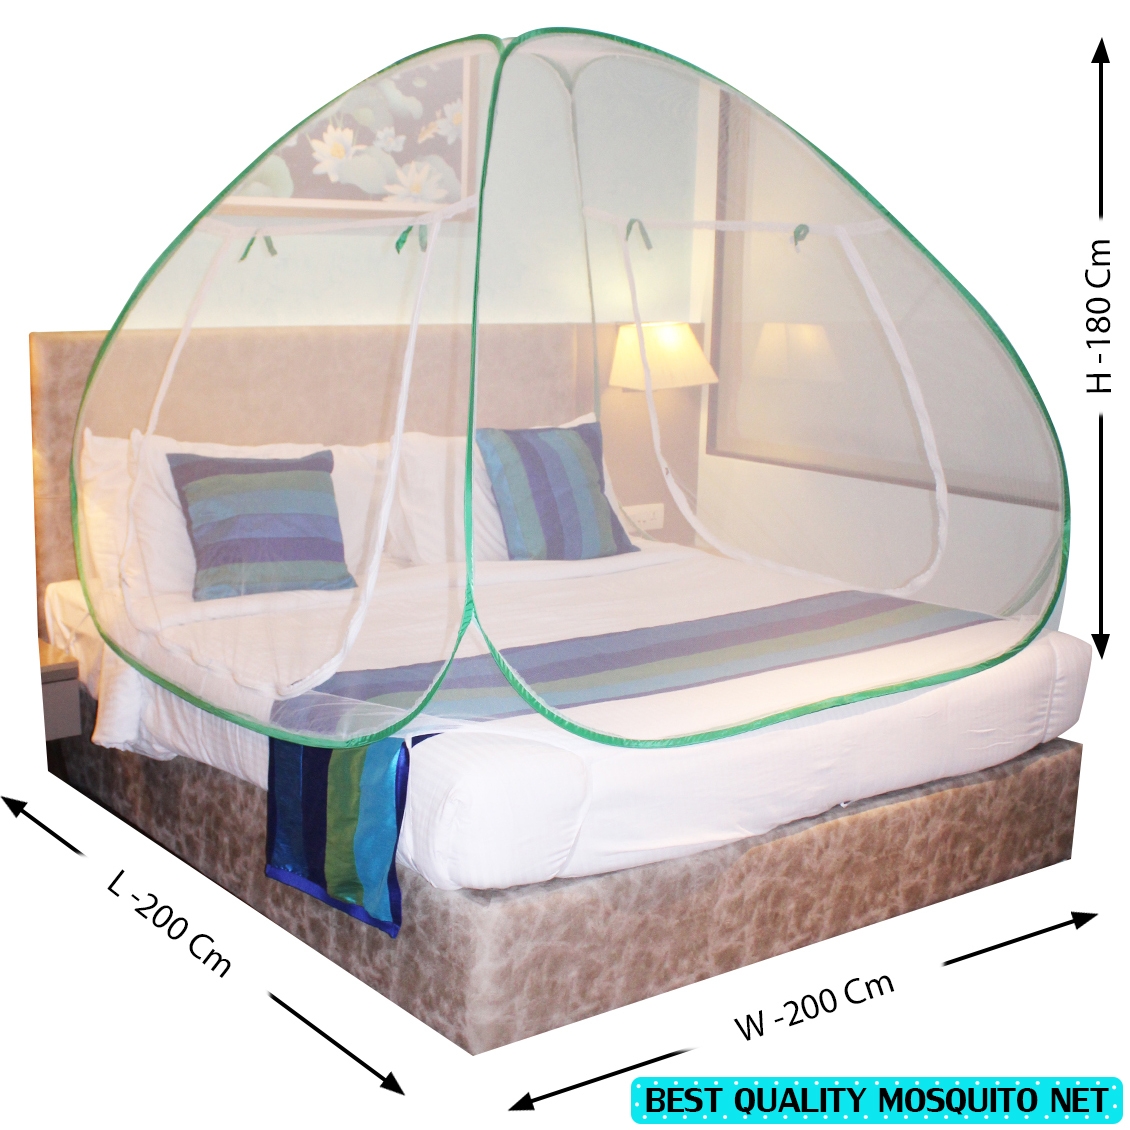  Green Mosquito Net Foldable Double Bed Net King Size 